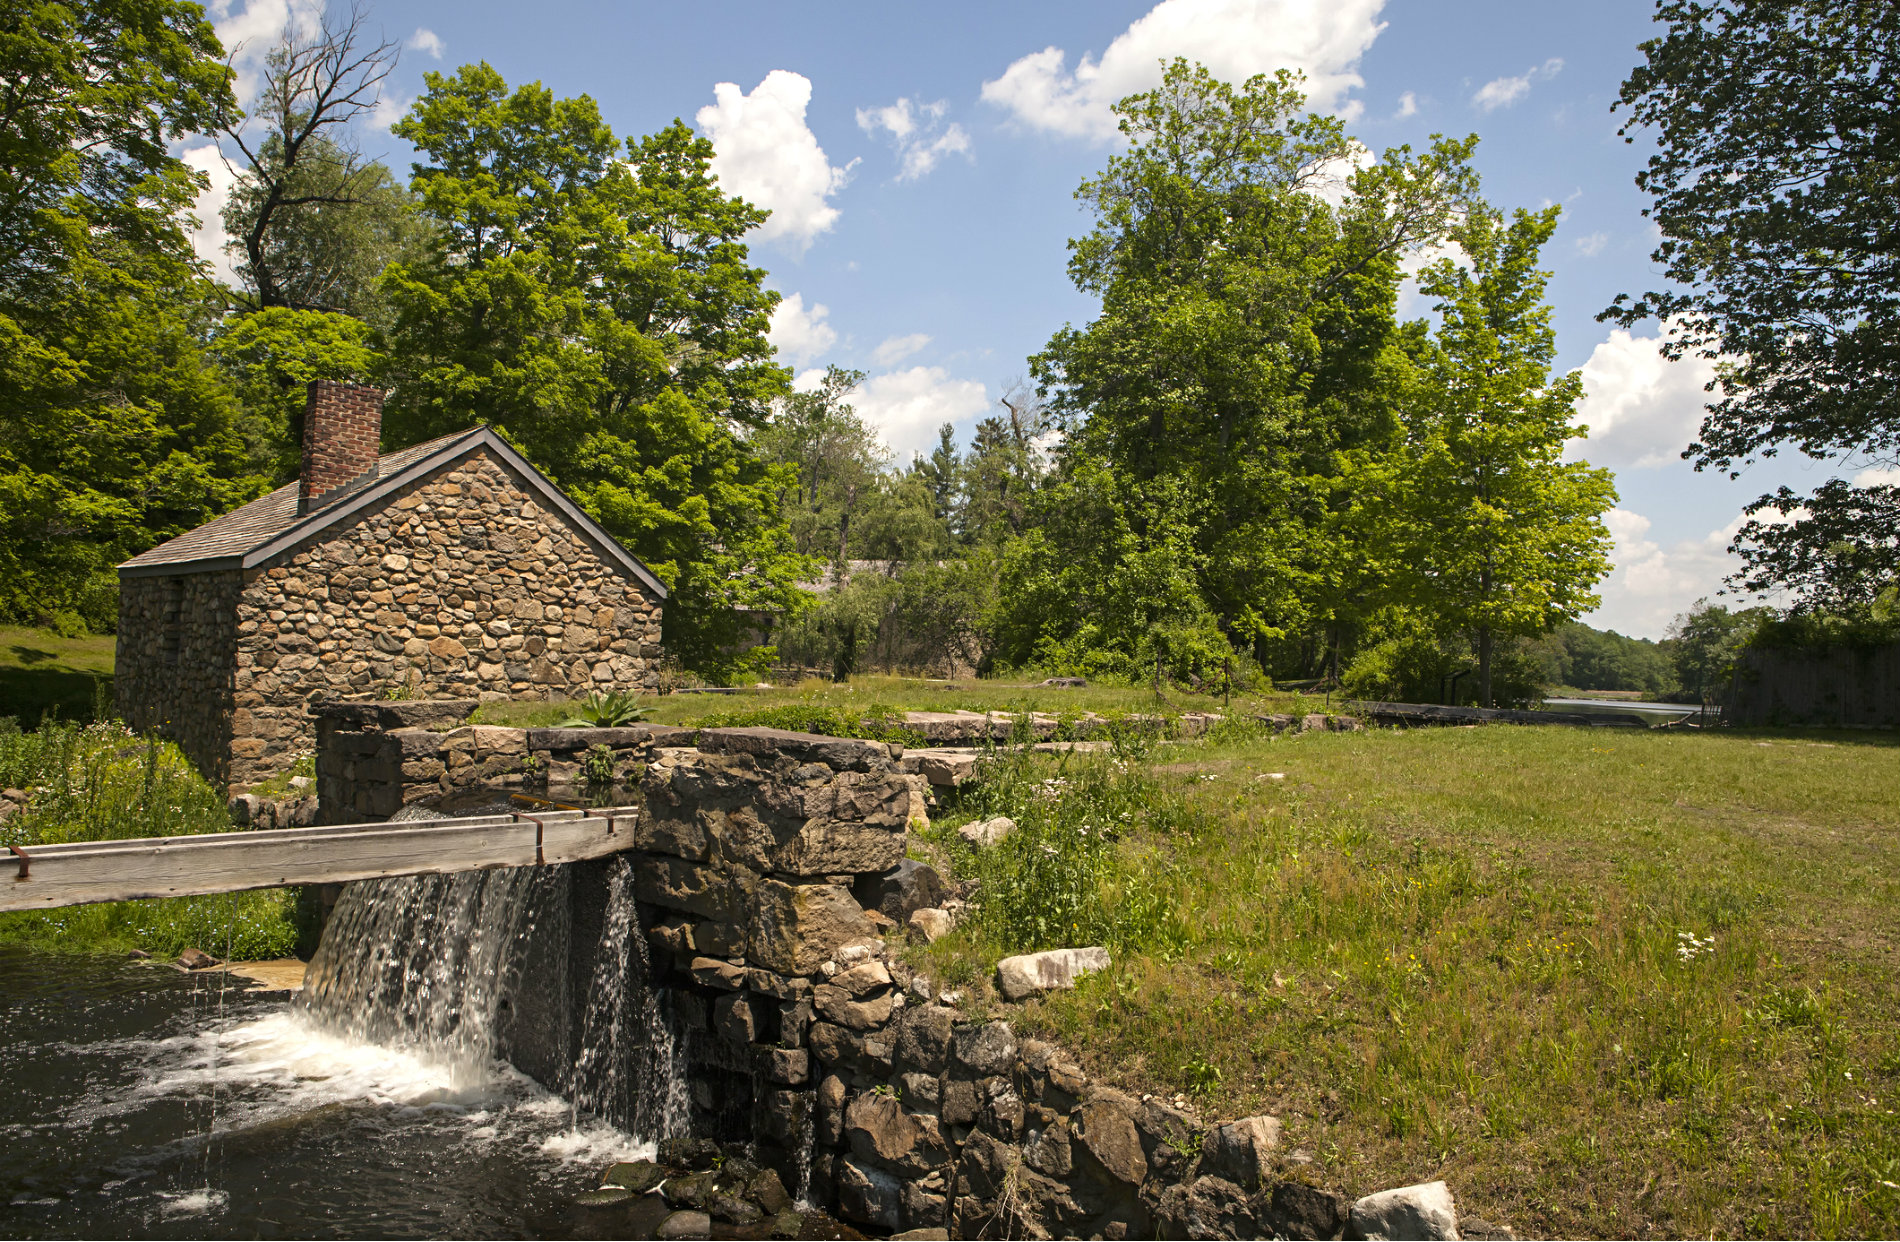 Old stone mill along the canal surrounded by scenic natural landscaping